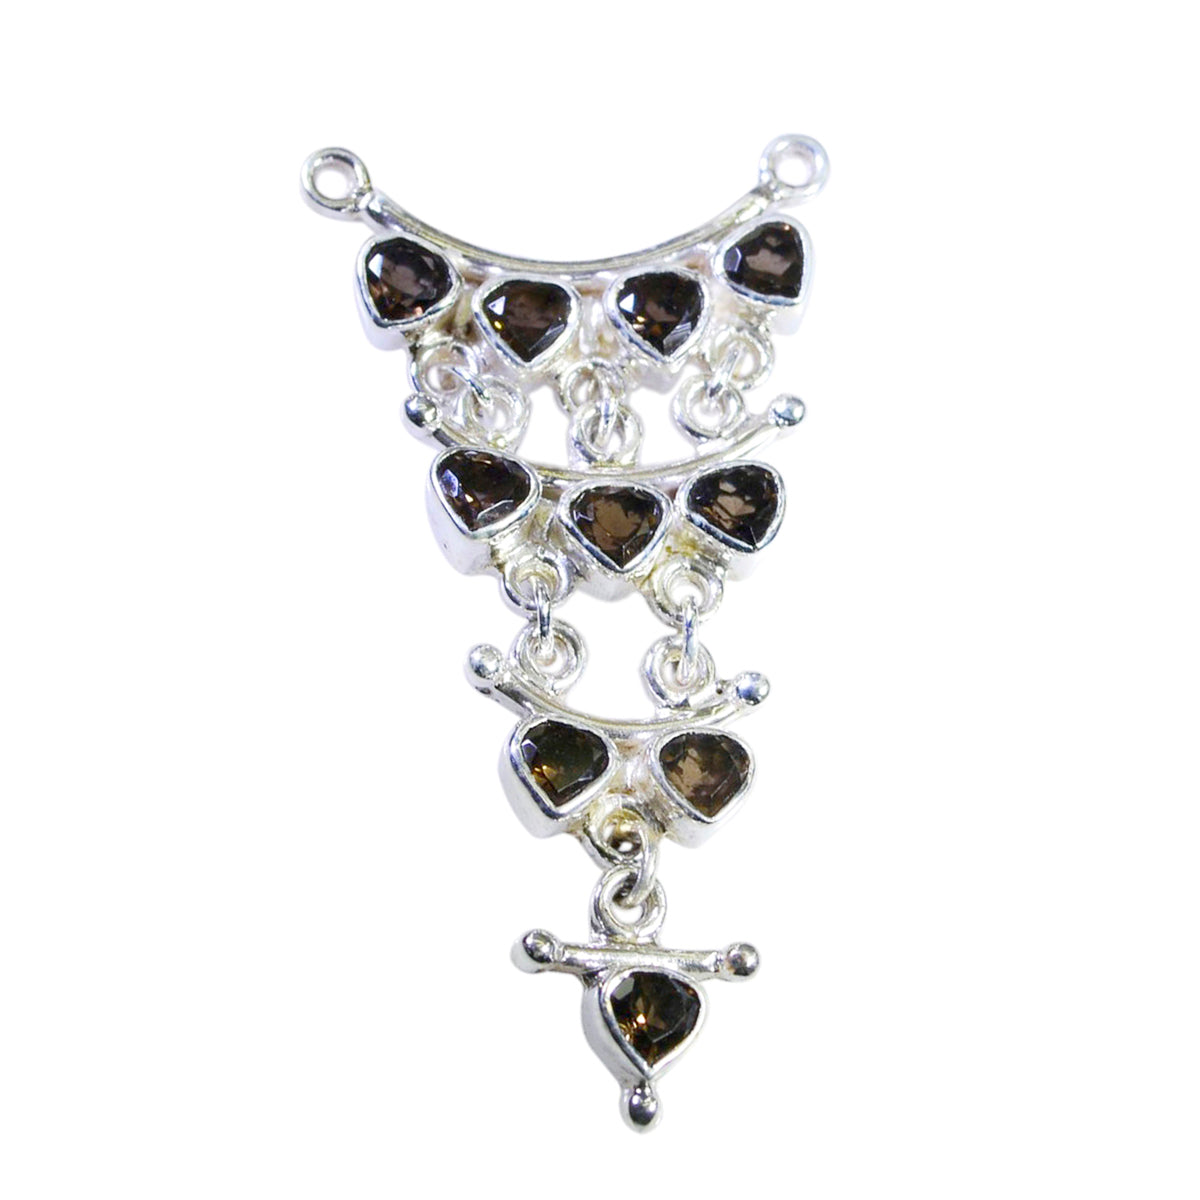 Riyo Appealing Gems Heart Faceted Brown Smoky Quartz Silver Pendant Gift For Wife